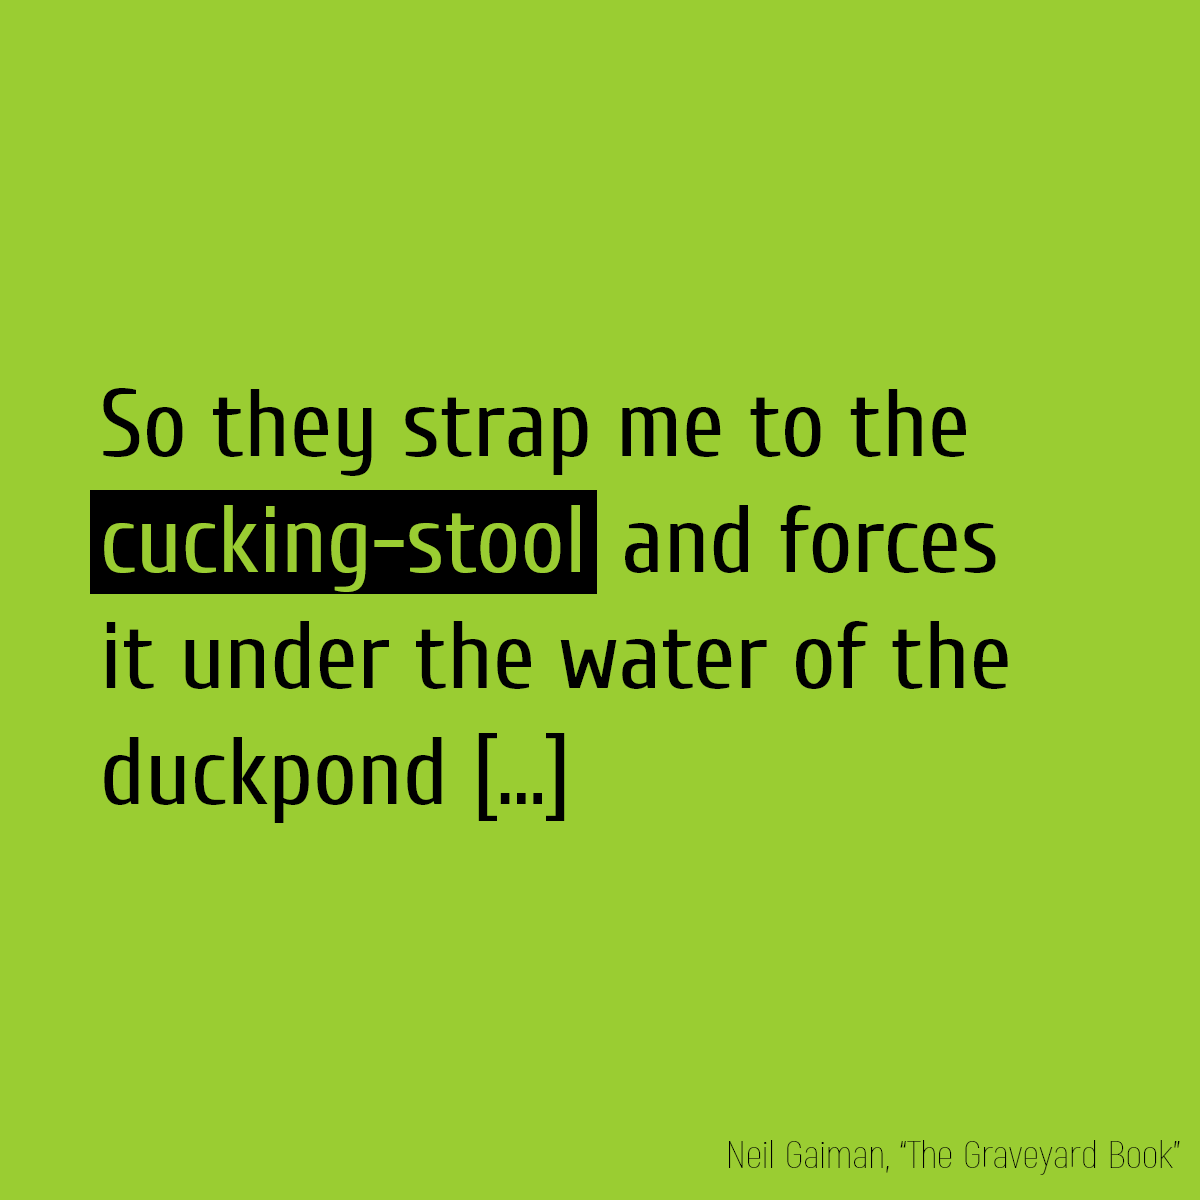 So they strap me to the **cucking-stool** and forces it under the water of the duckpond,